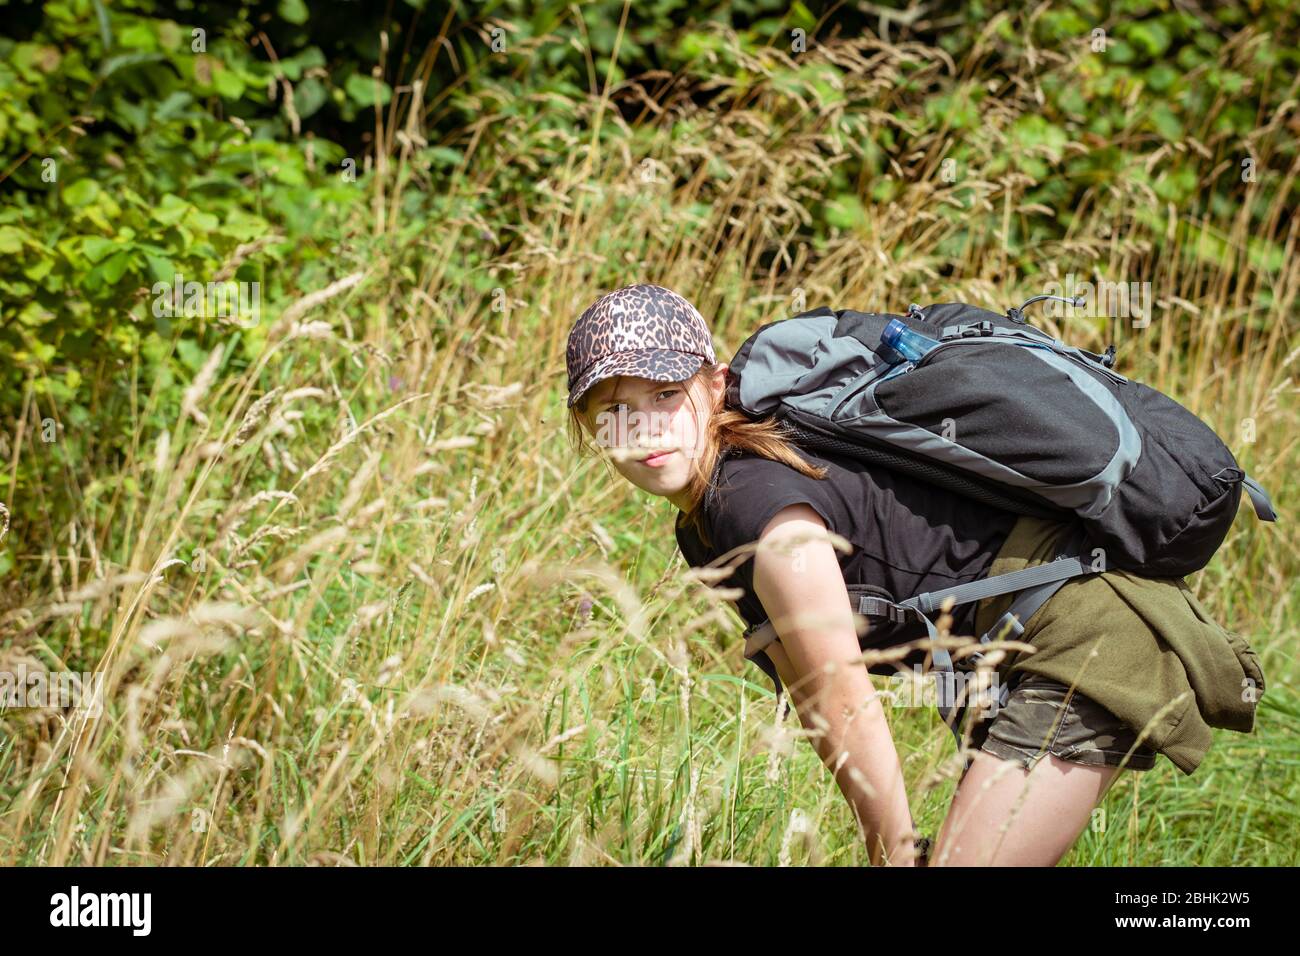 Teenage girl exploring nature on a long hike in the countryshide with backpack Stock Photo